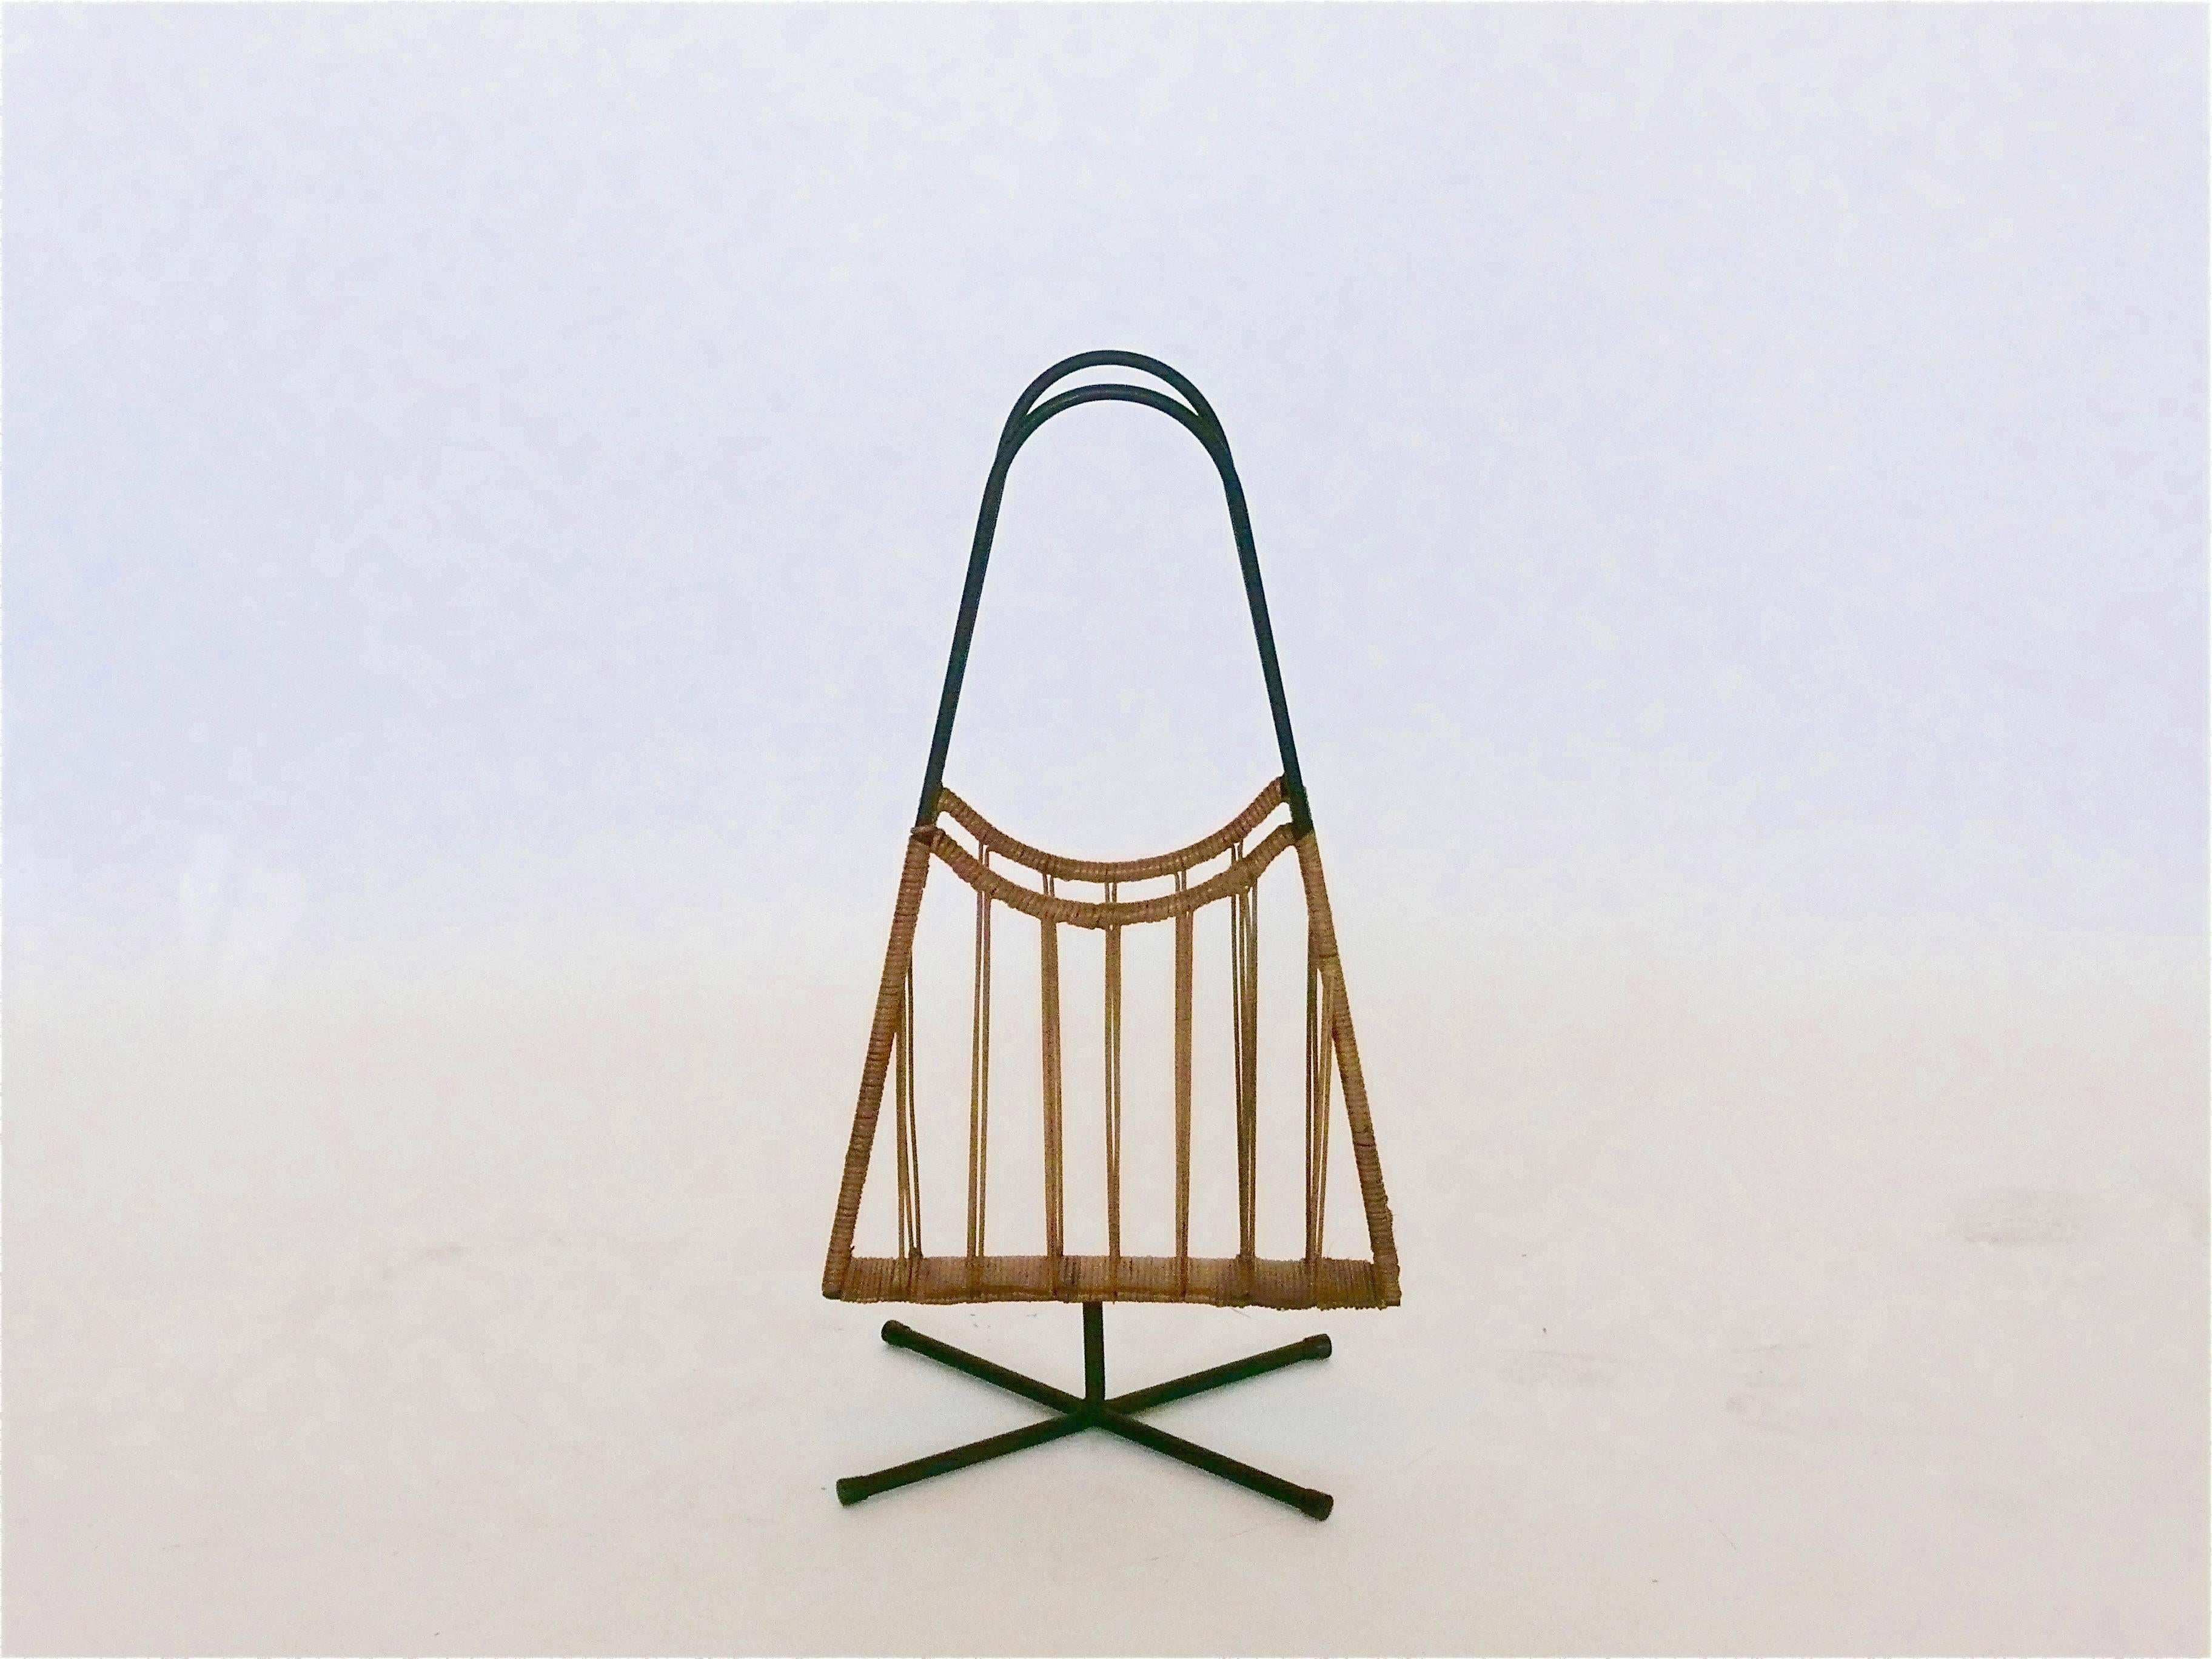 Sculptural magazine rack in wicker and iron in the style of Franco Albini. Great shape and function.